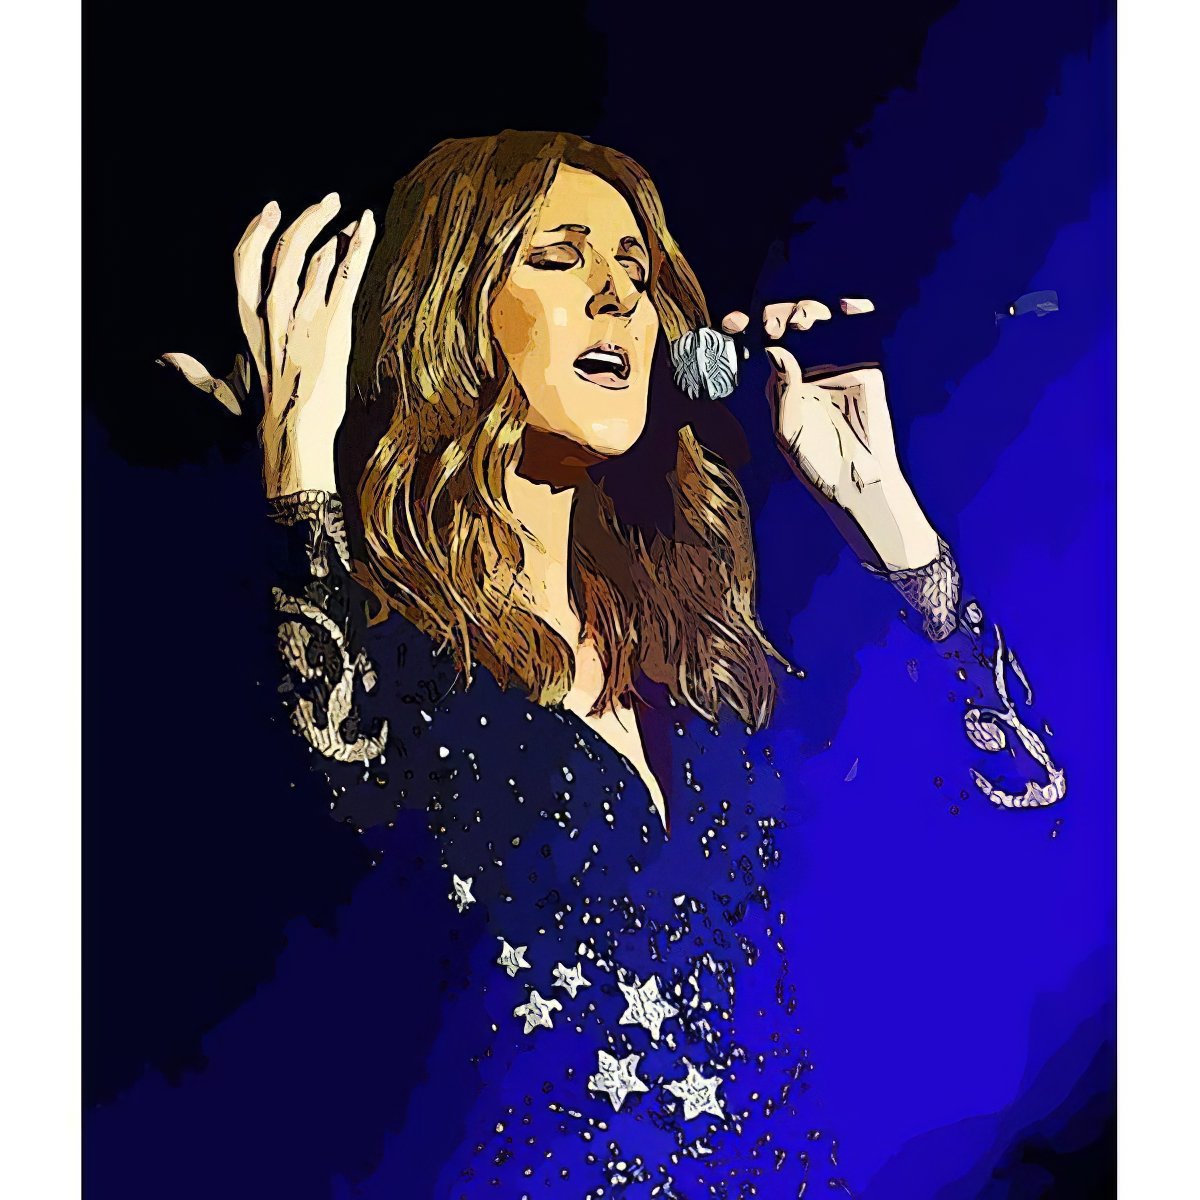 Celebrating Celine Dion, her powerful voice and emotive music that touch hearts worldwide.Celine Dion - Diamondartlove